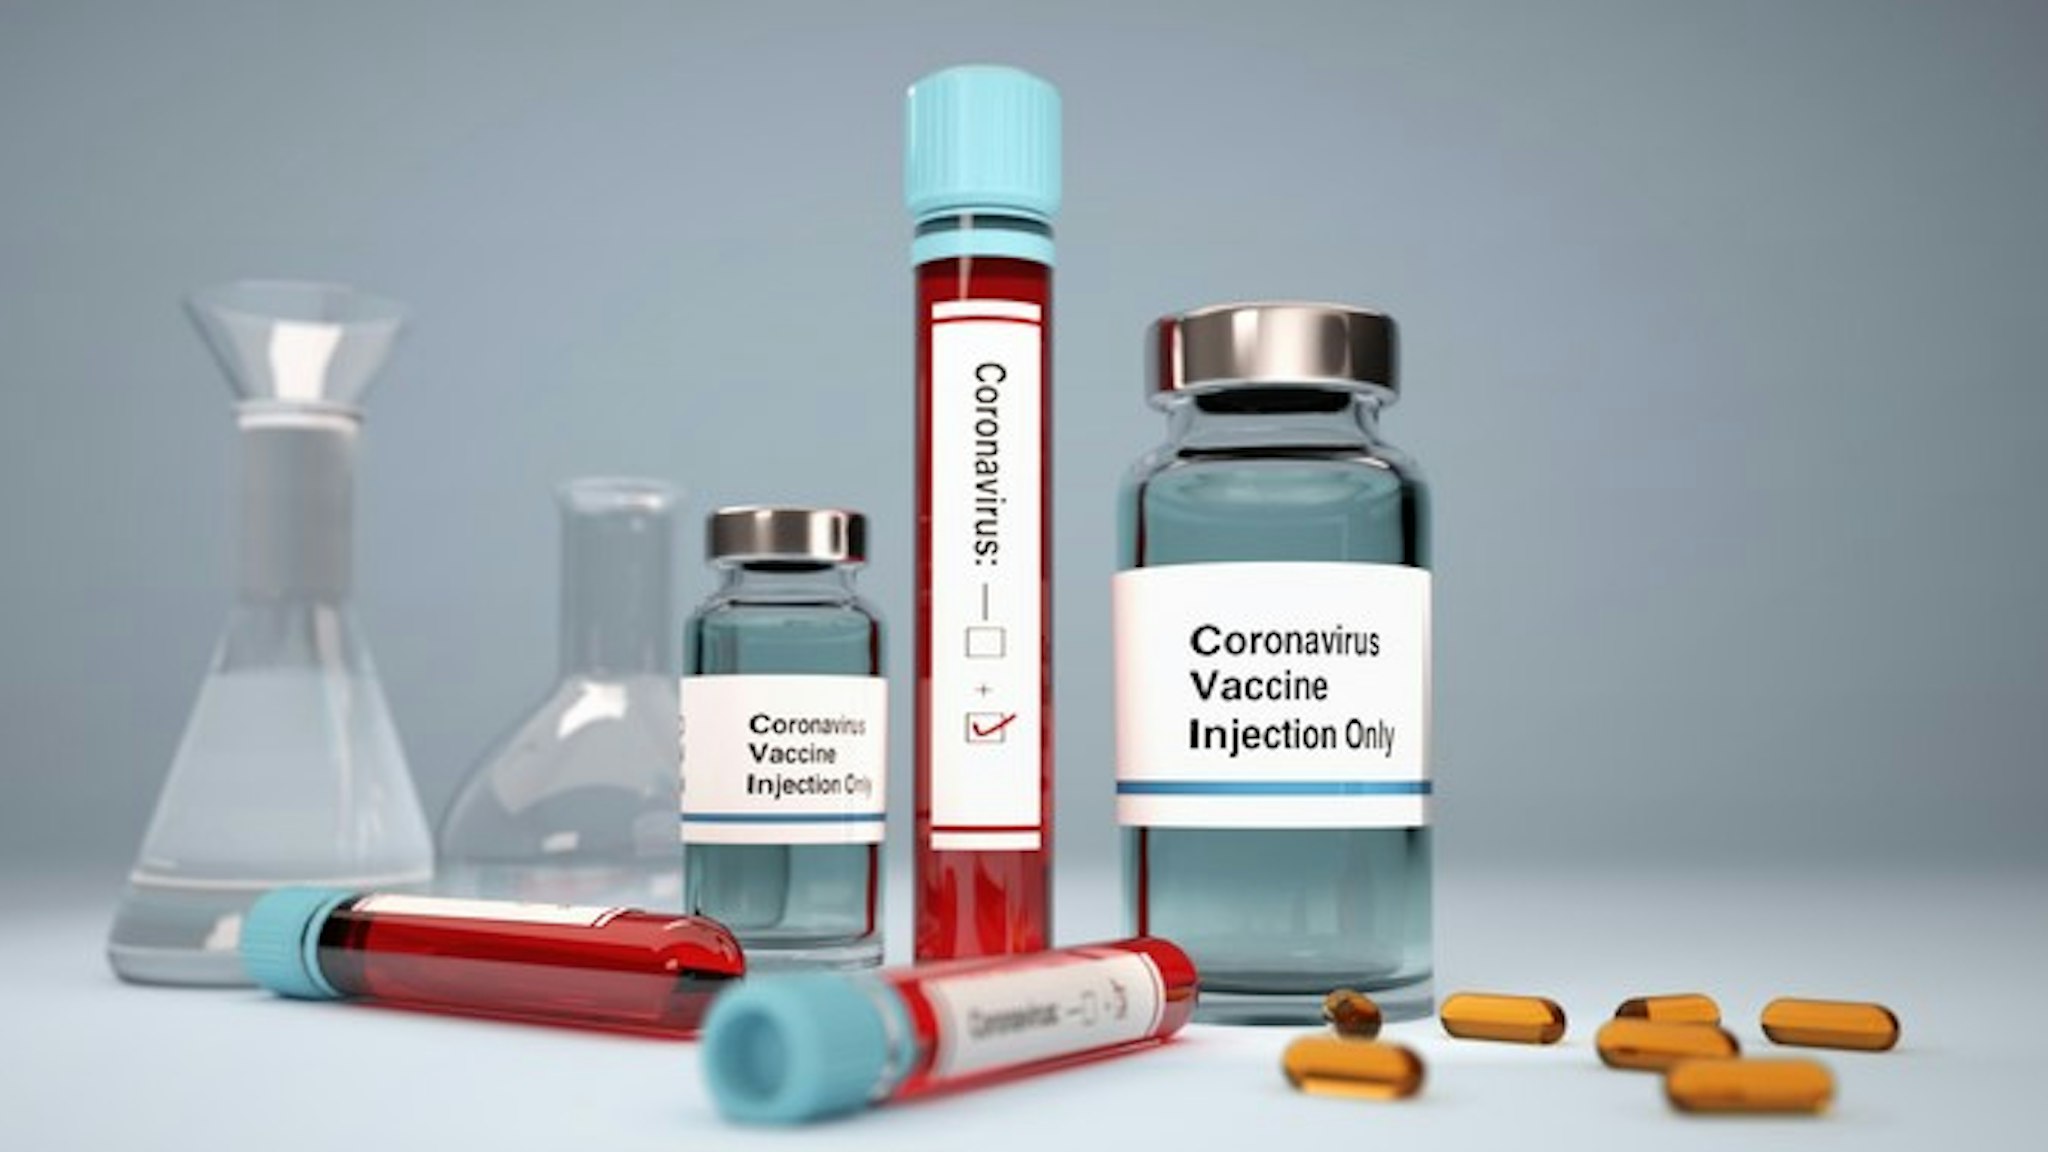 Coronavirus vaccine research is currently the most needed drug in various countries